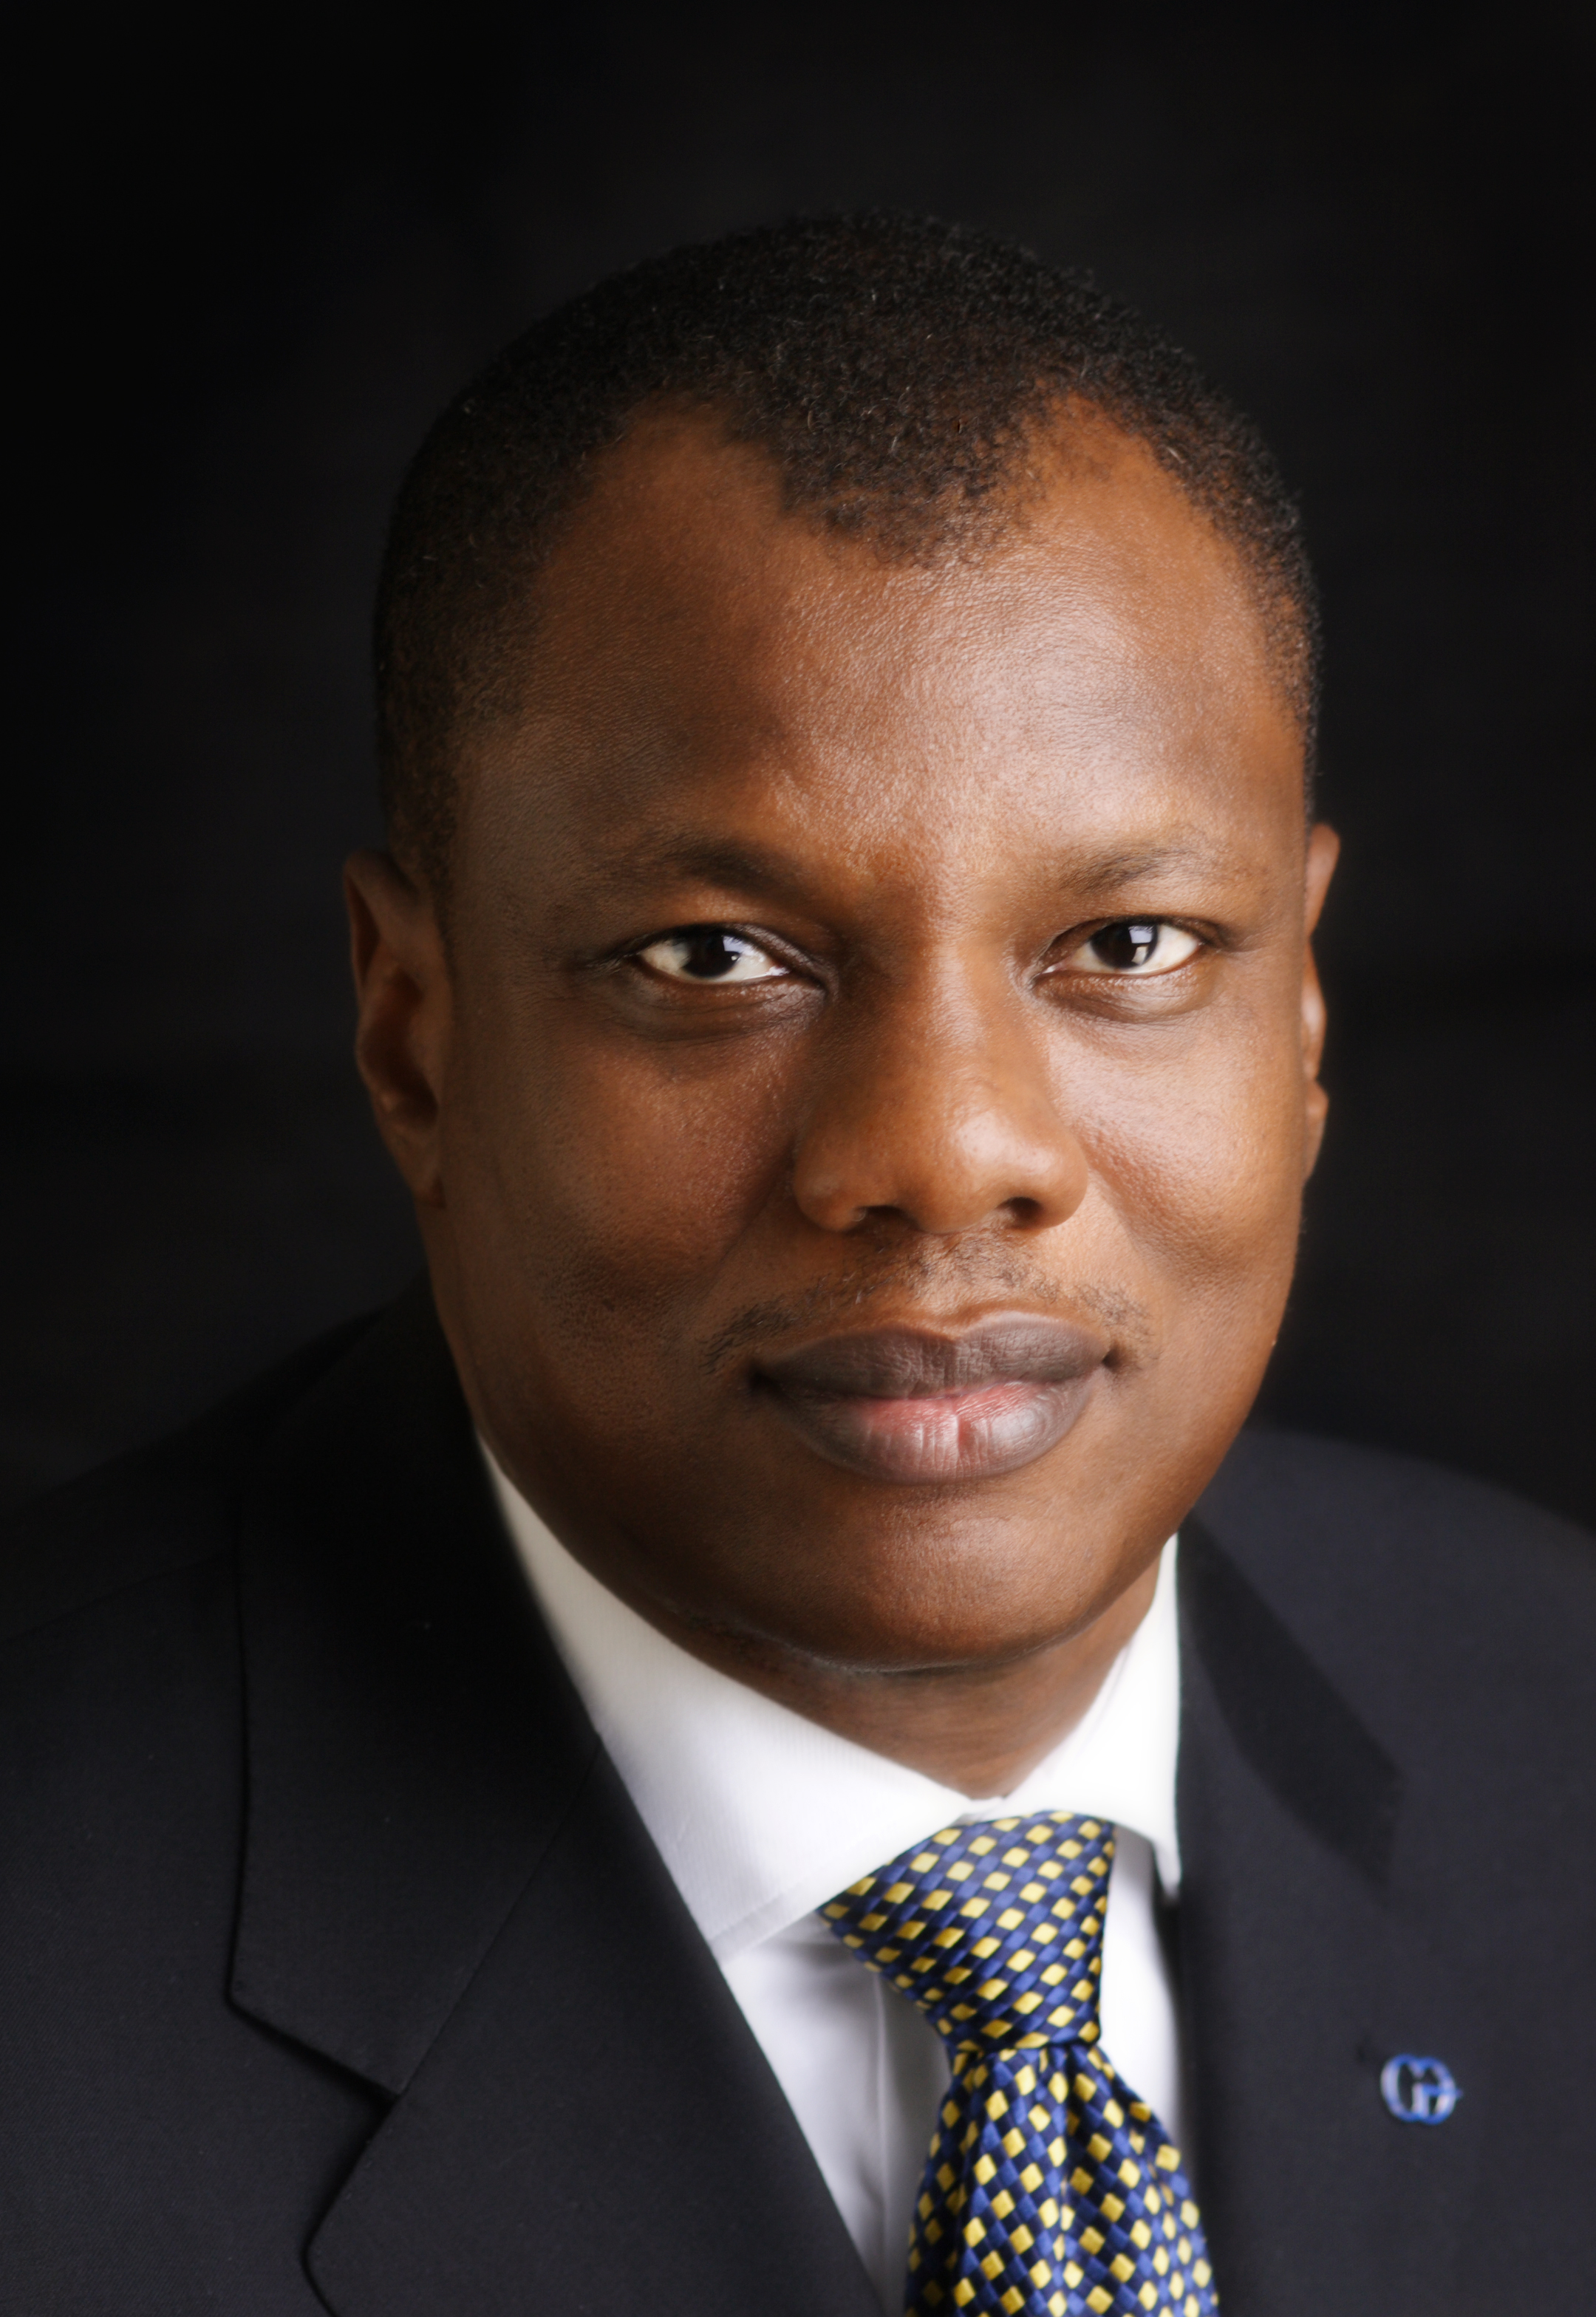 CWG Boss, Austin Okere appointed into Telecom Industry Advisor Council